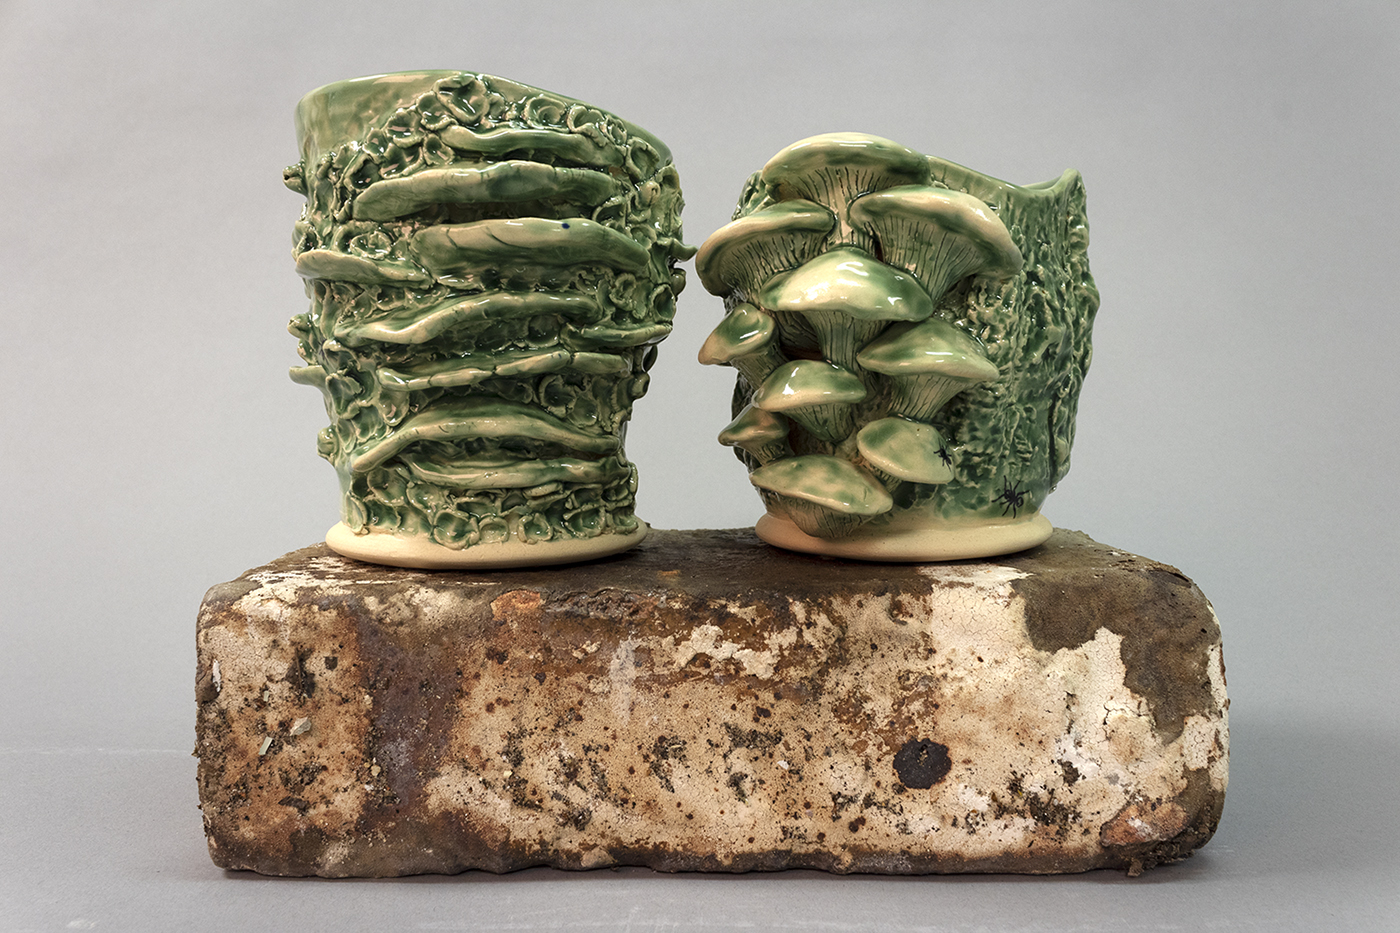 Two cups with mushrooms carved and sculpted with green glaze.  Sitting on a brick.